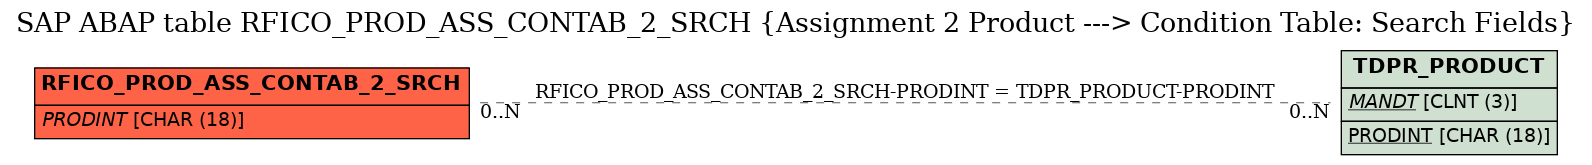 E-R Diagram for table RFICO_PROD_ASS_CONTAB_2_SRCH (Assignment 2 Product ---> Condition Table: Search Fields)